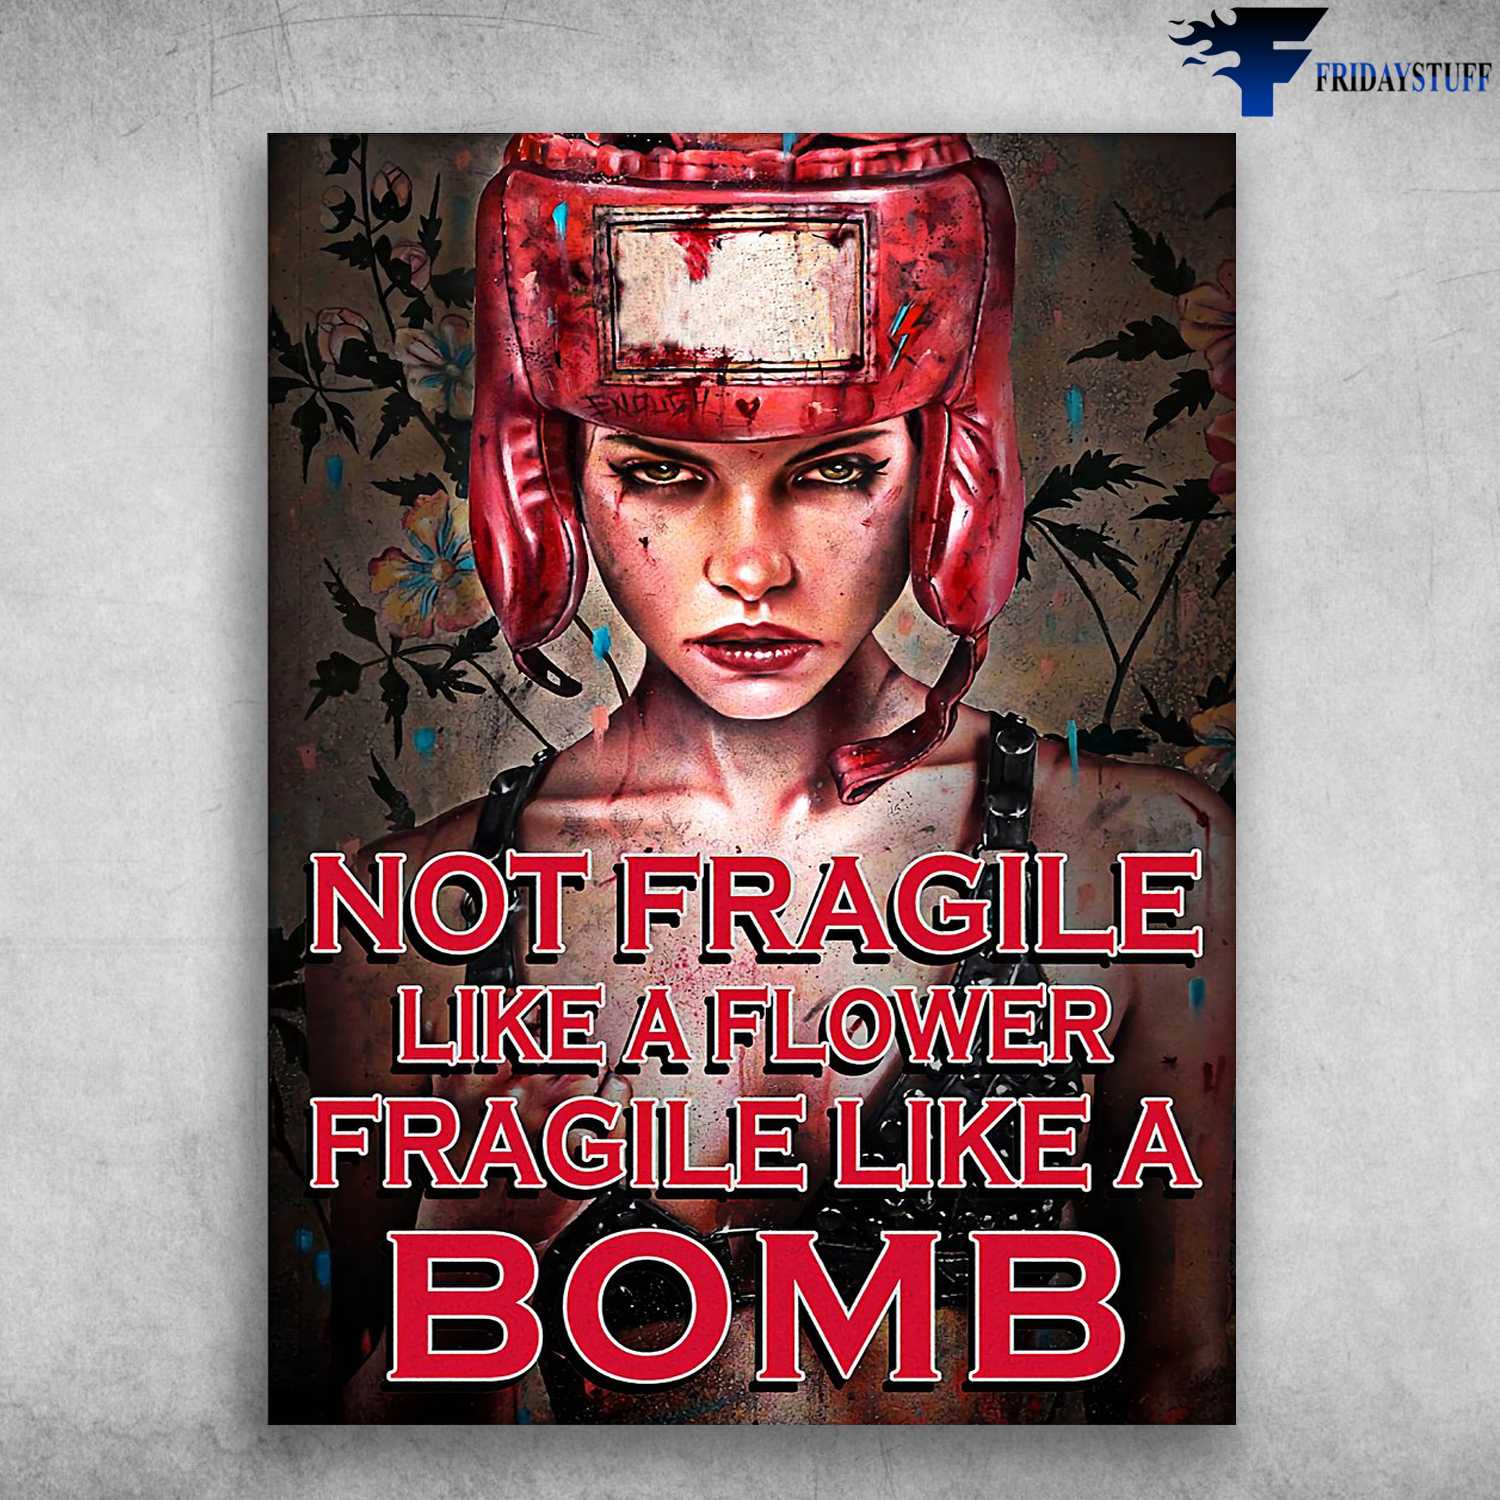 Lady Boxing, Boxing Poster - No Fragile, Like A Flower, Fragile Like A Bomb